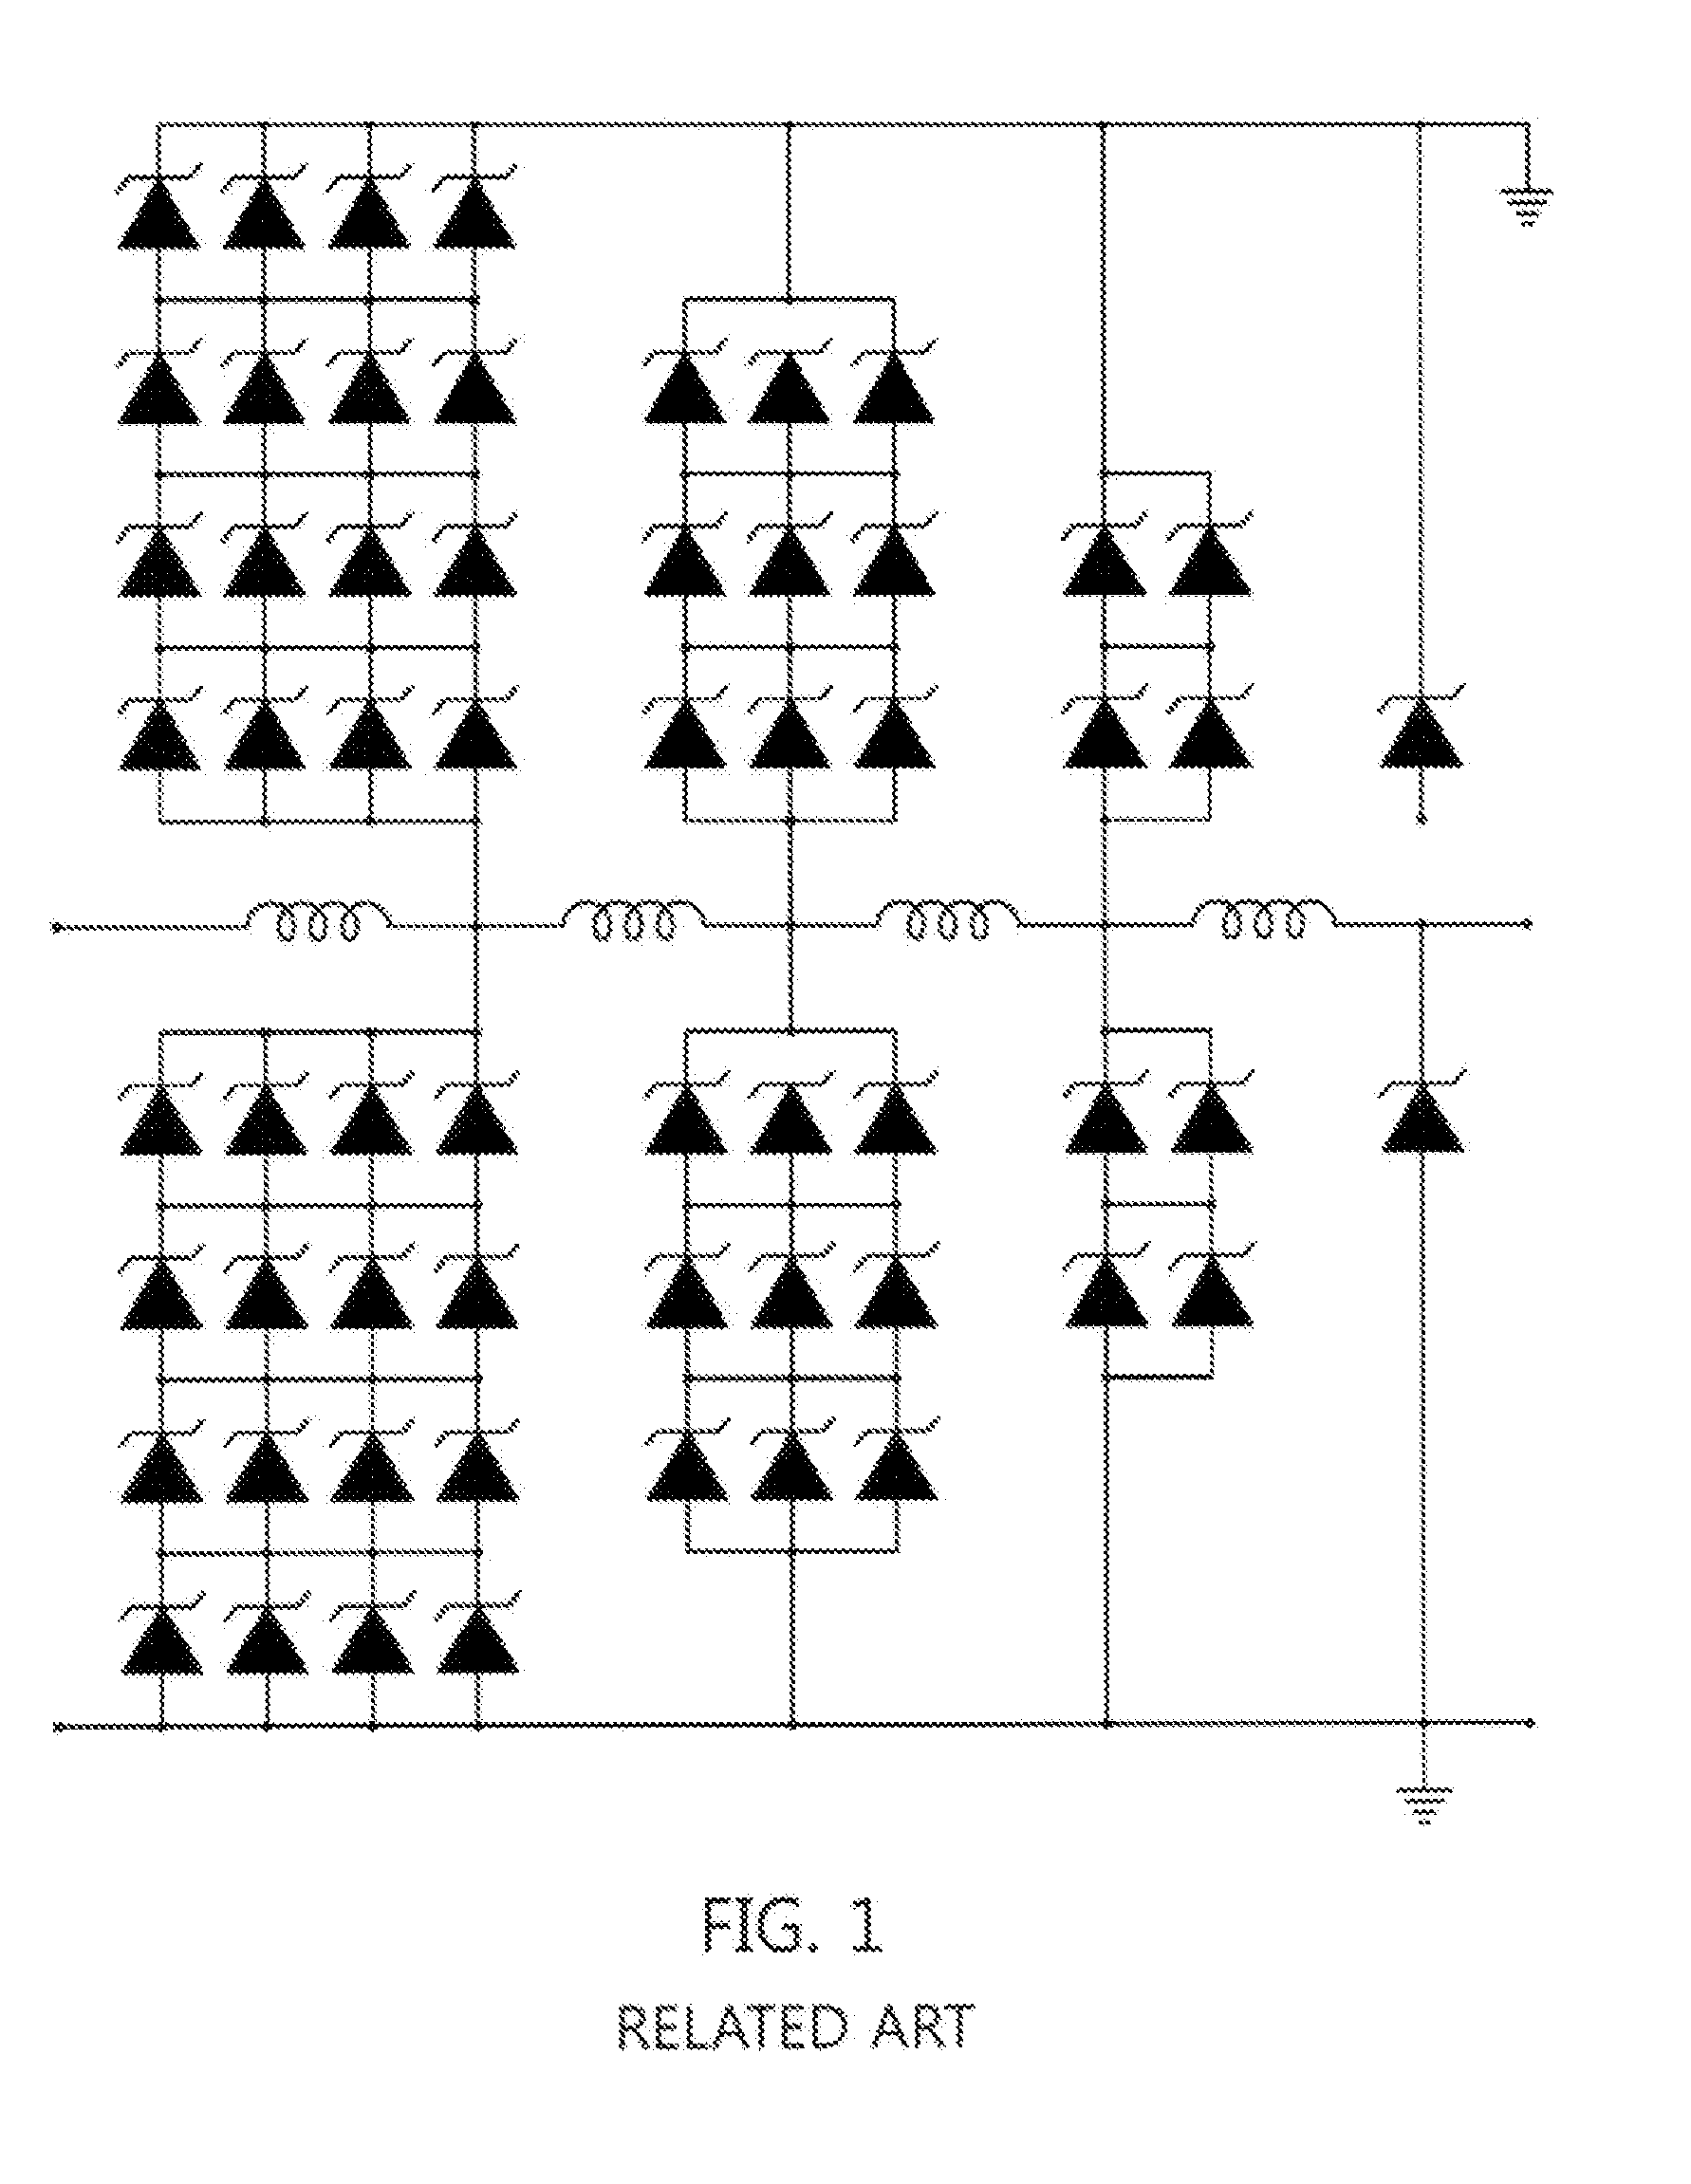 Stacked diode limiter